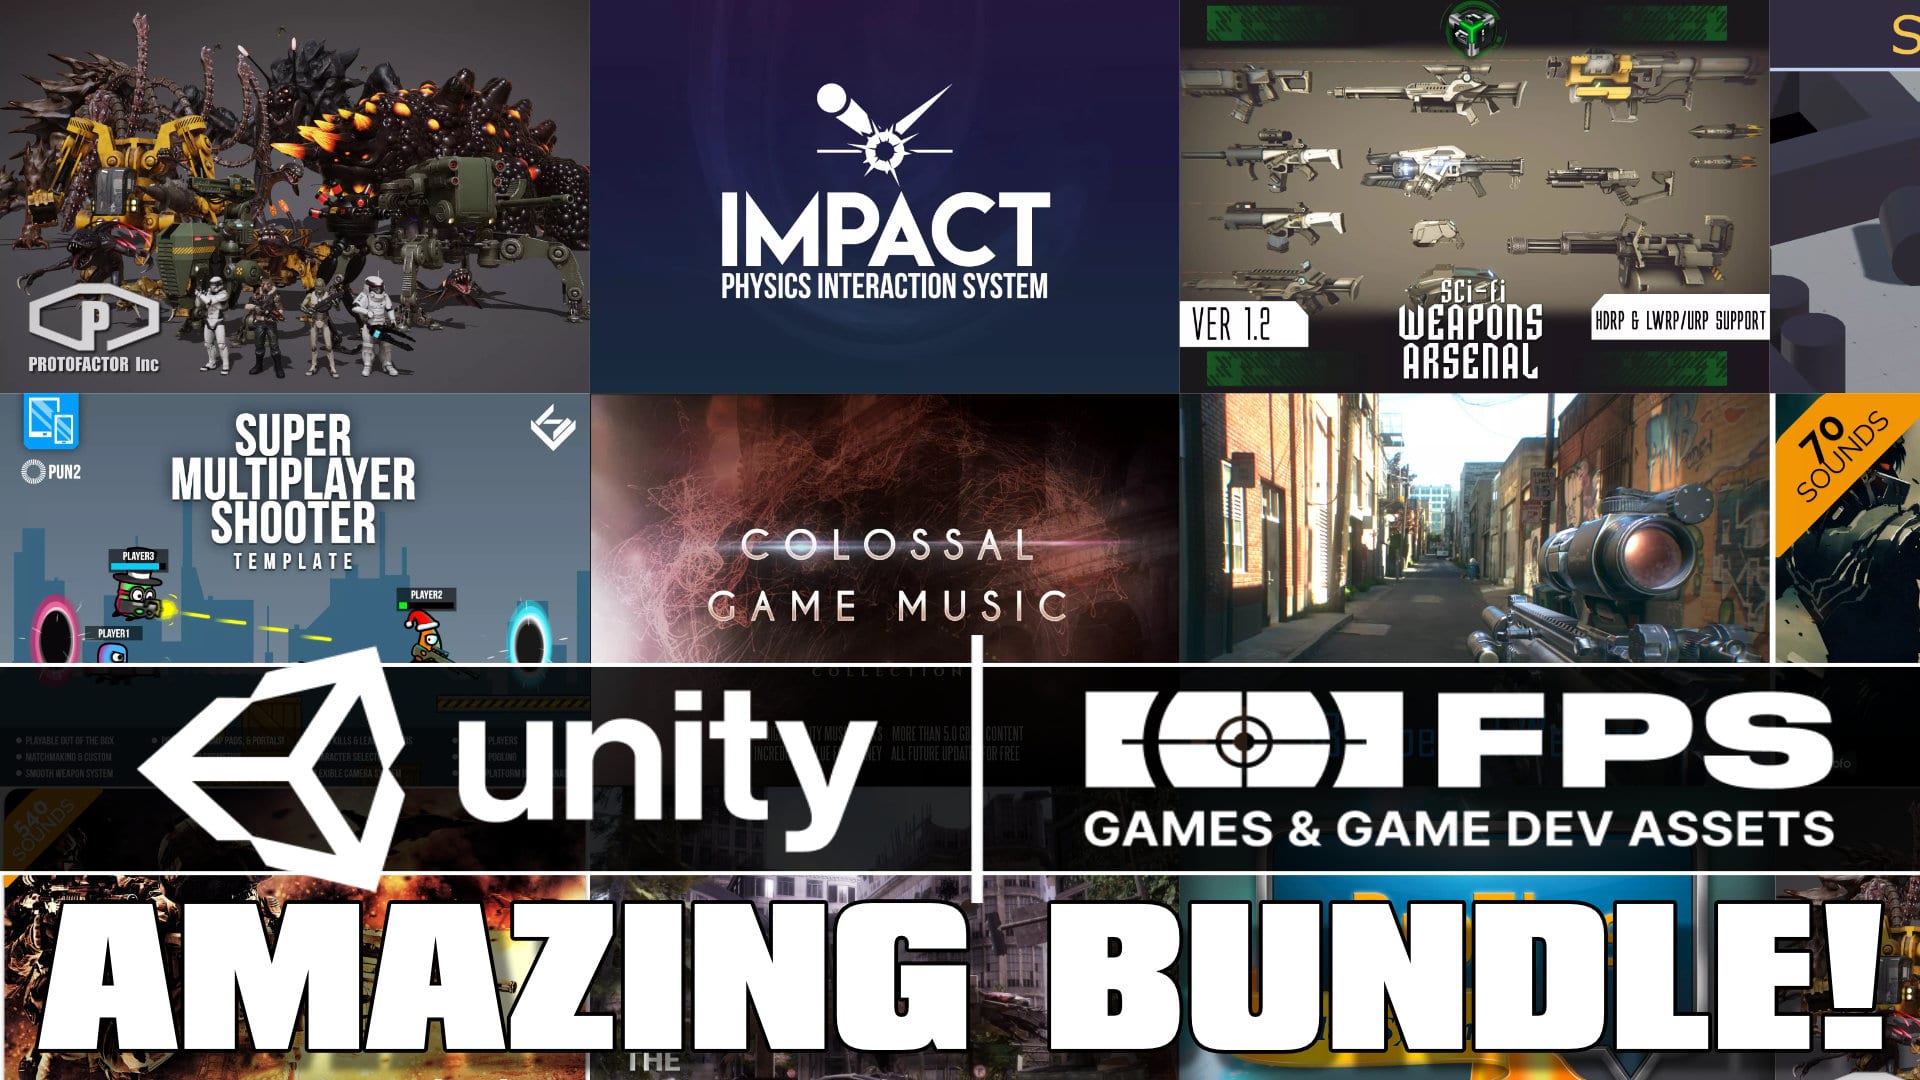 Learn To Make Games in Unity 2022 Humble Bundle –